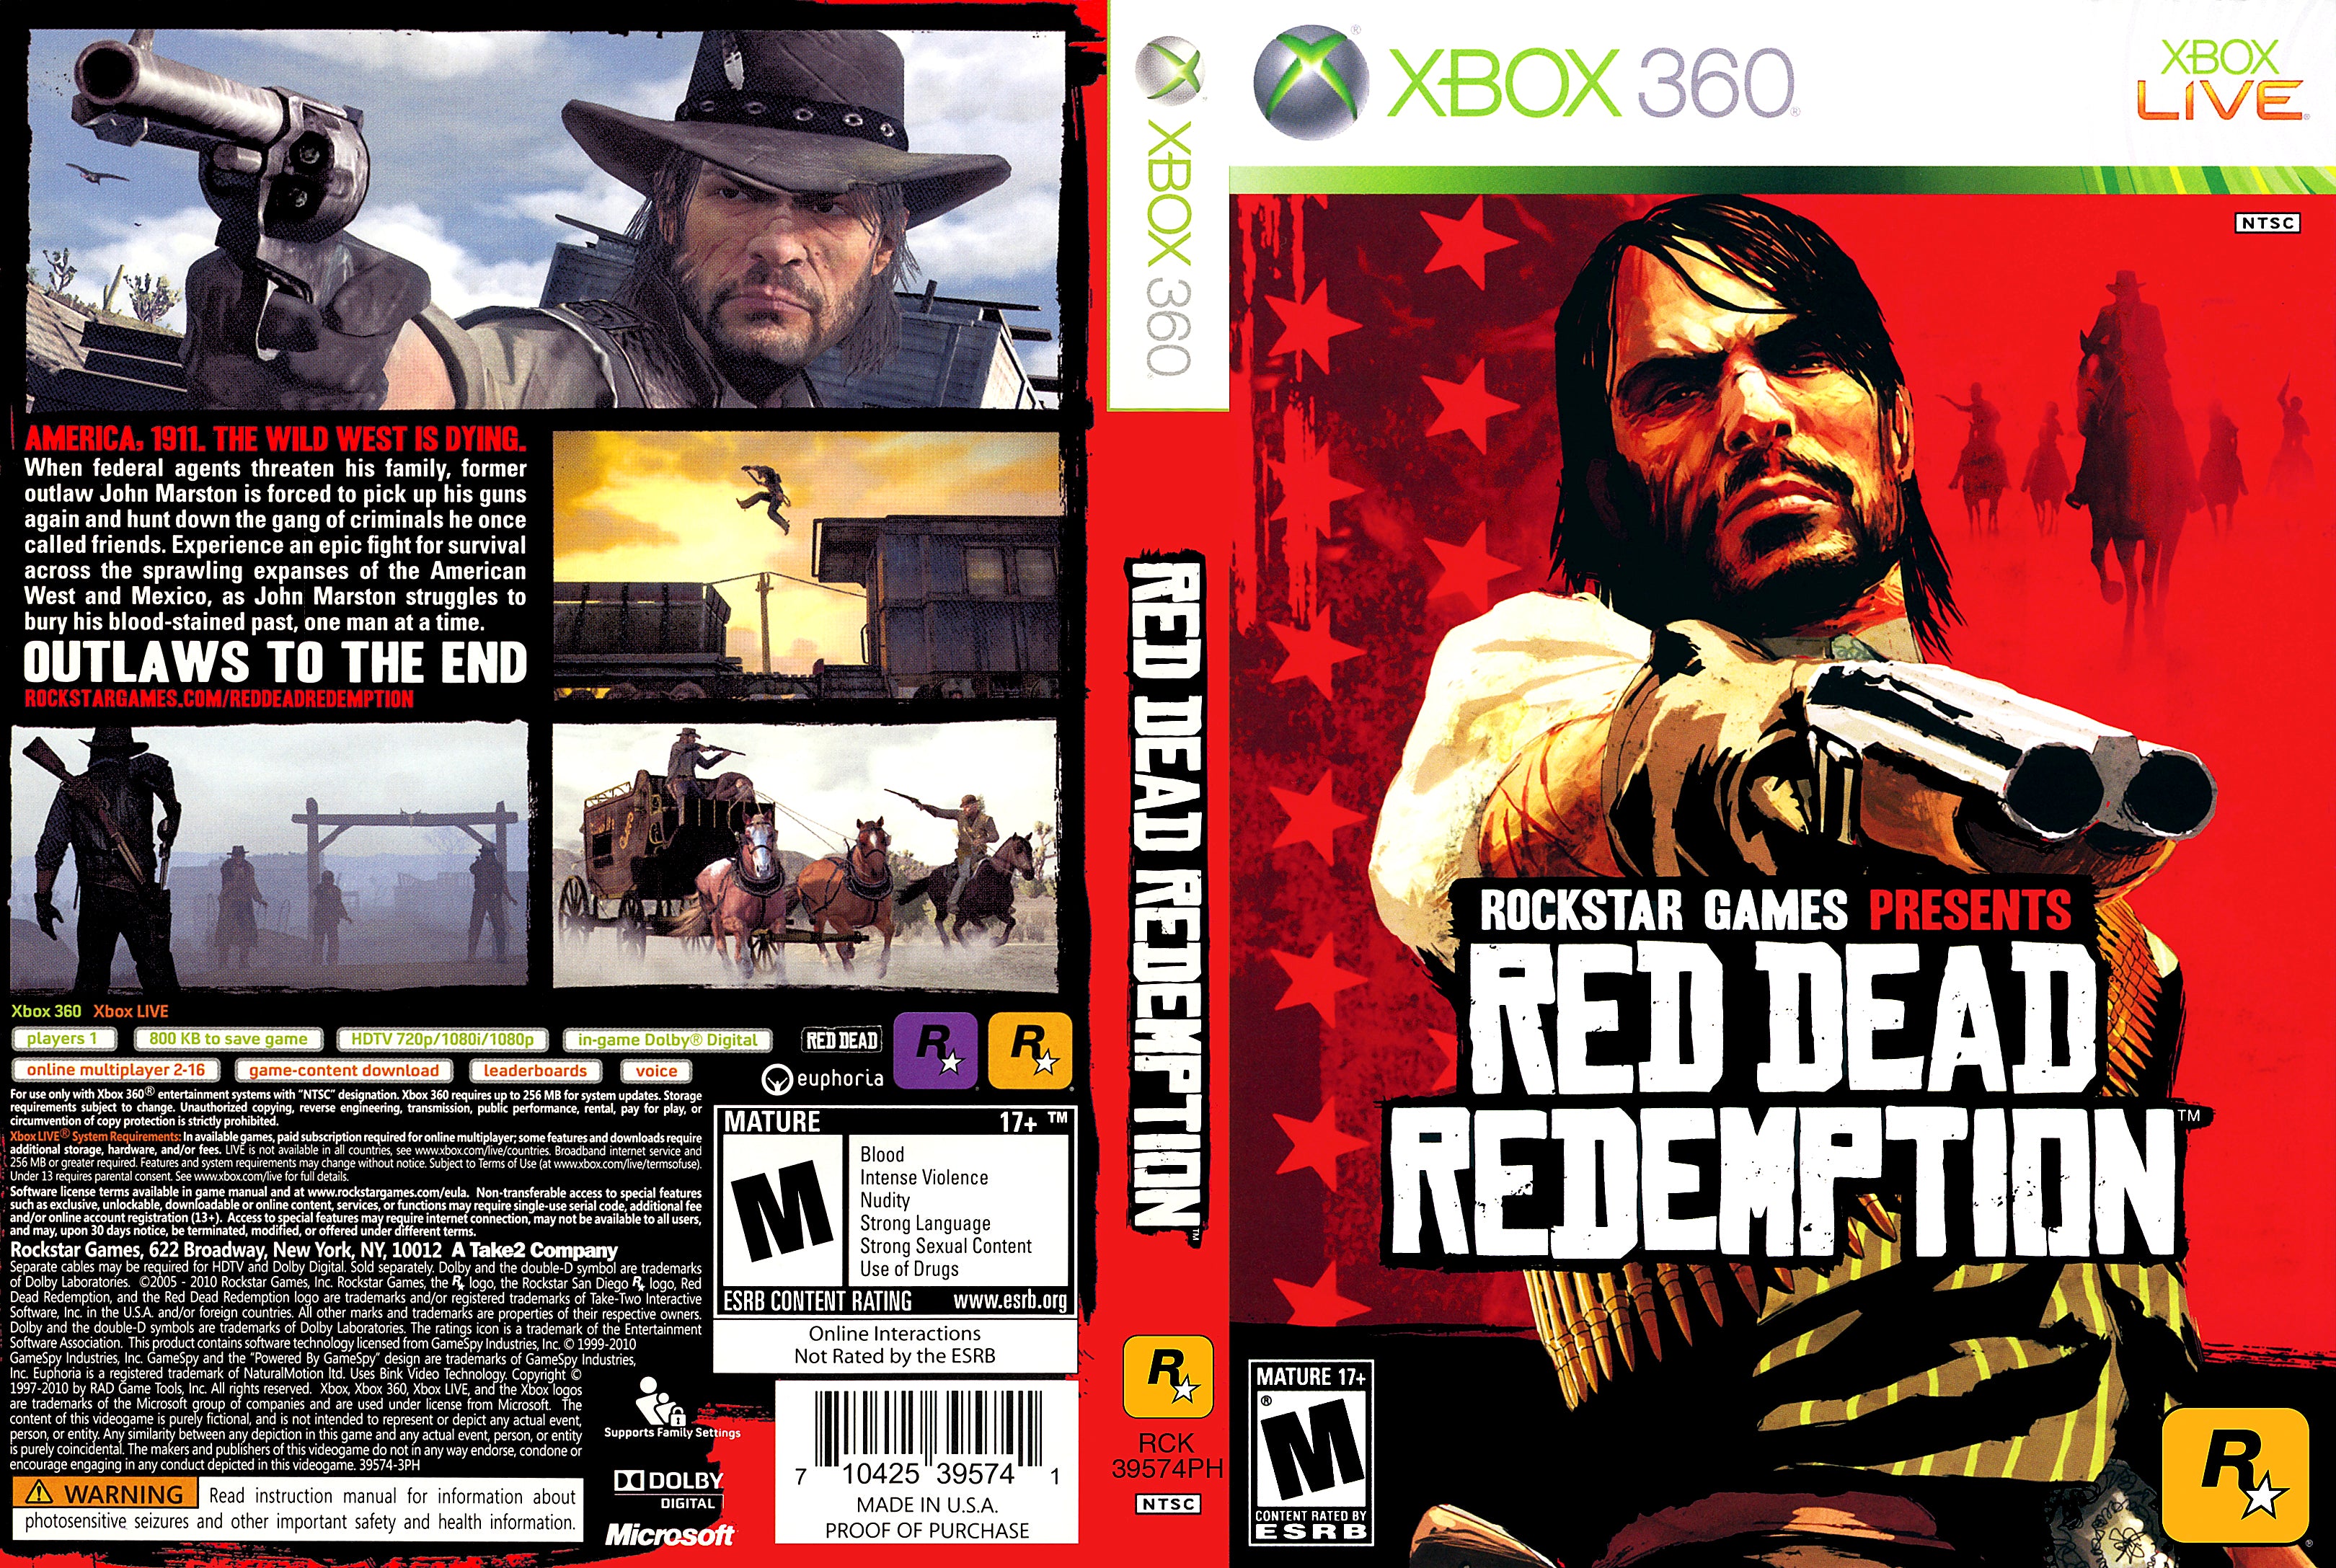 Games for a living. Диск на Xbox 360 Red Dead. Red Dead Redemption диск Xbox 360. Red Dead Redemption 1 Xbox 360. Red Dead Redemption 2 Xbox диск.